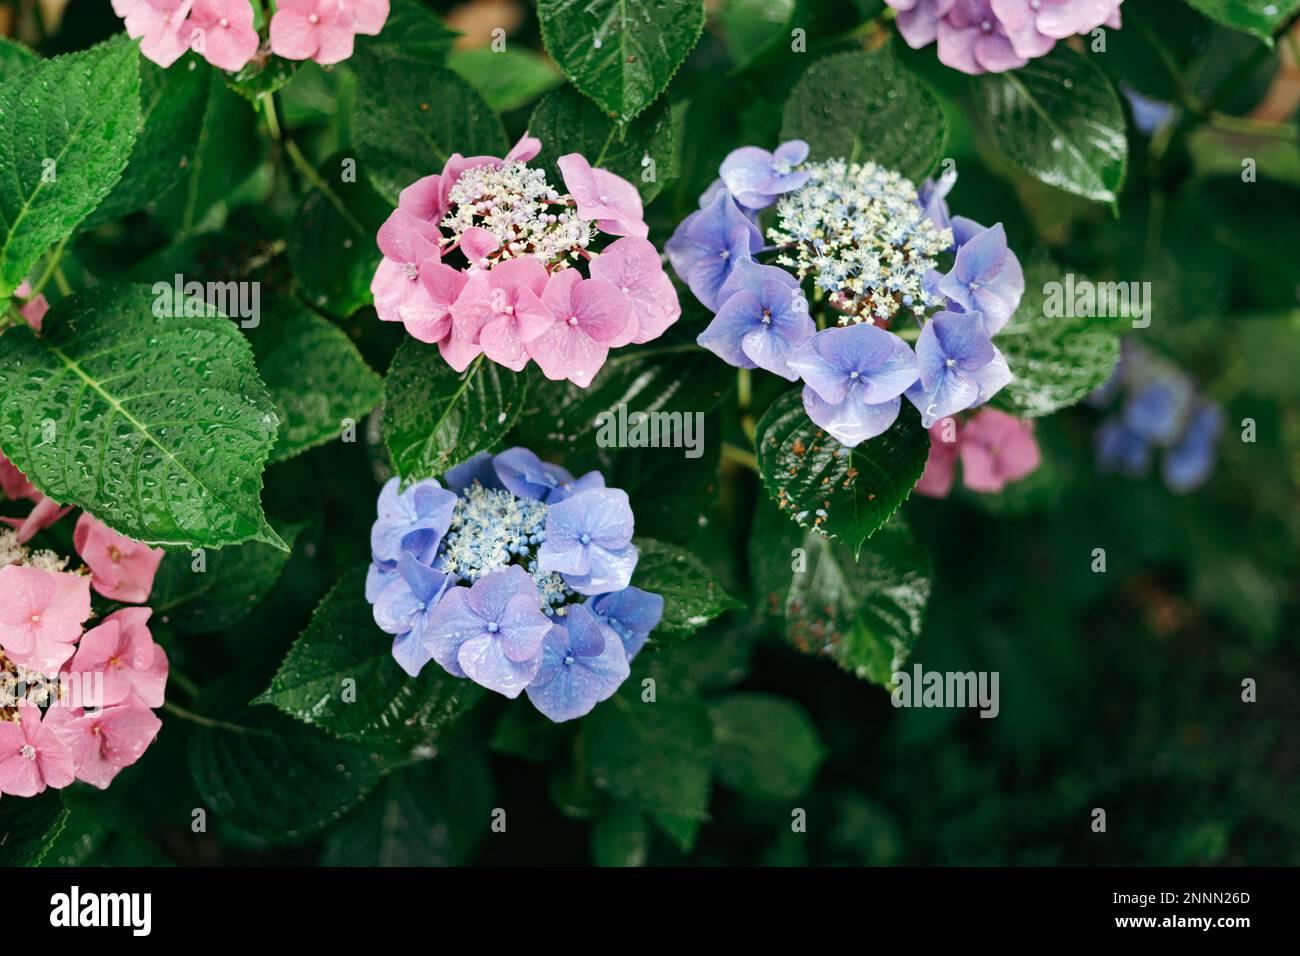 Hydrangea macrophylla, a species of flowering plant in the family Hydrangeaceae, with raindrops on it Stock Photo